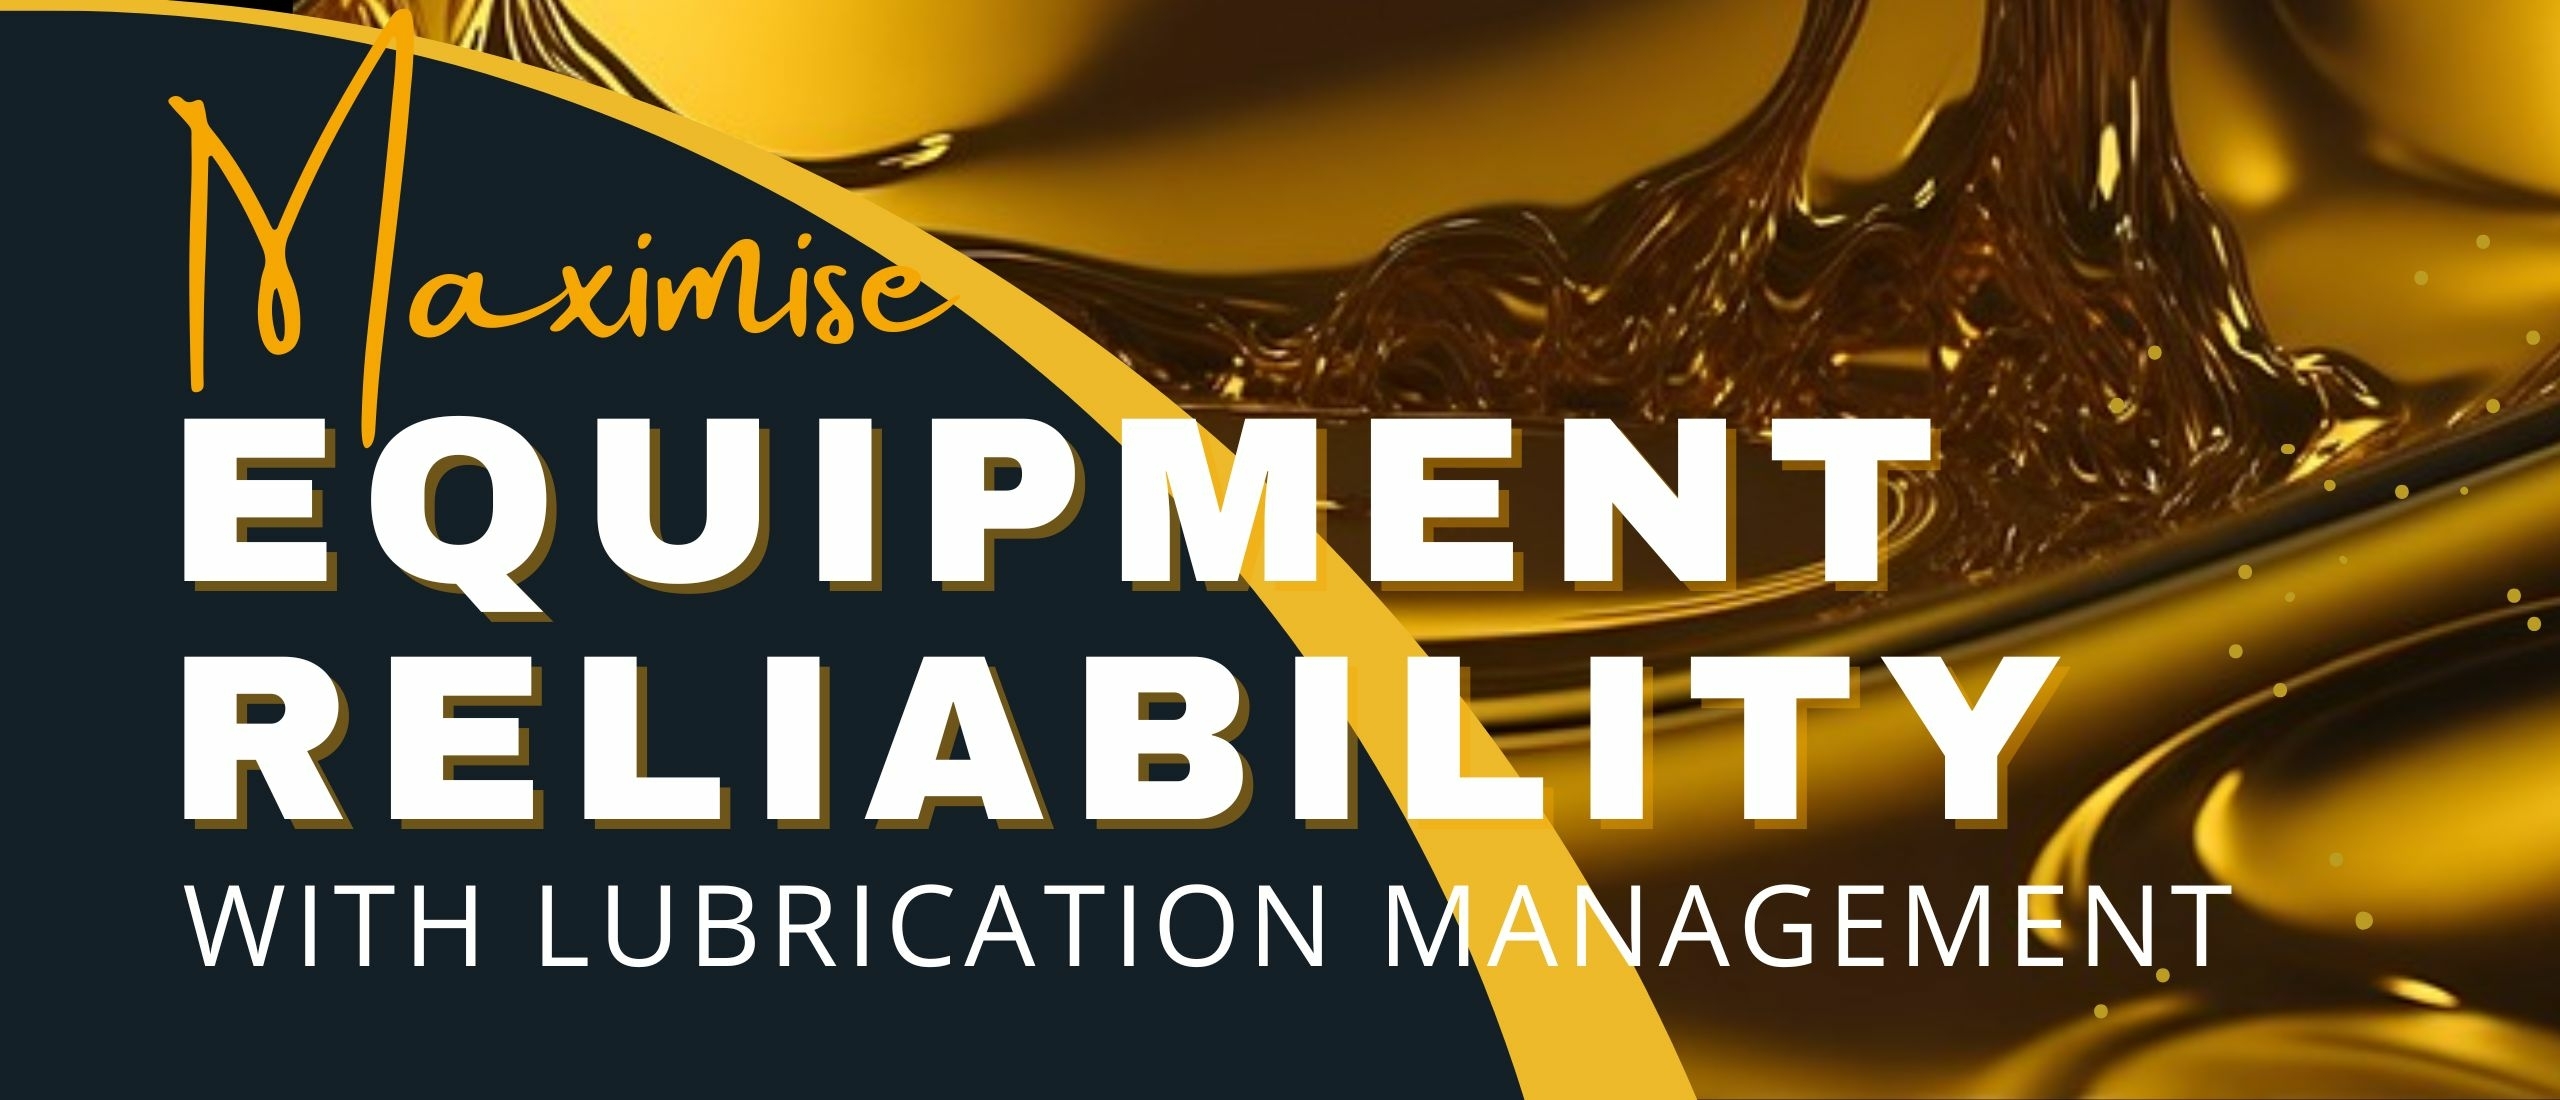 Maximise Equipment Reliability with Lubrication Management